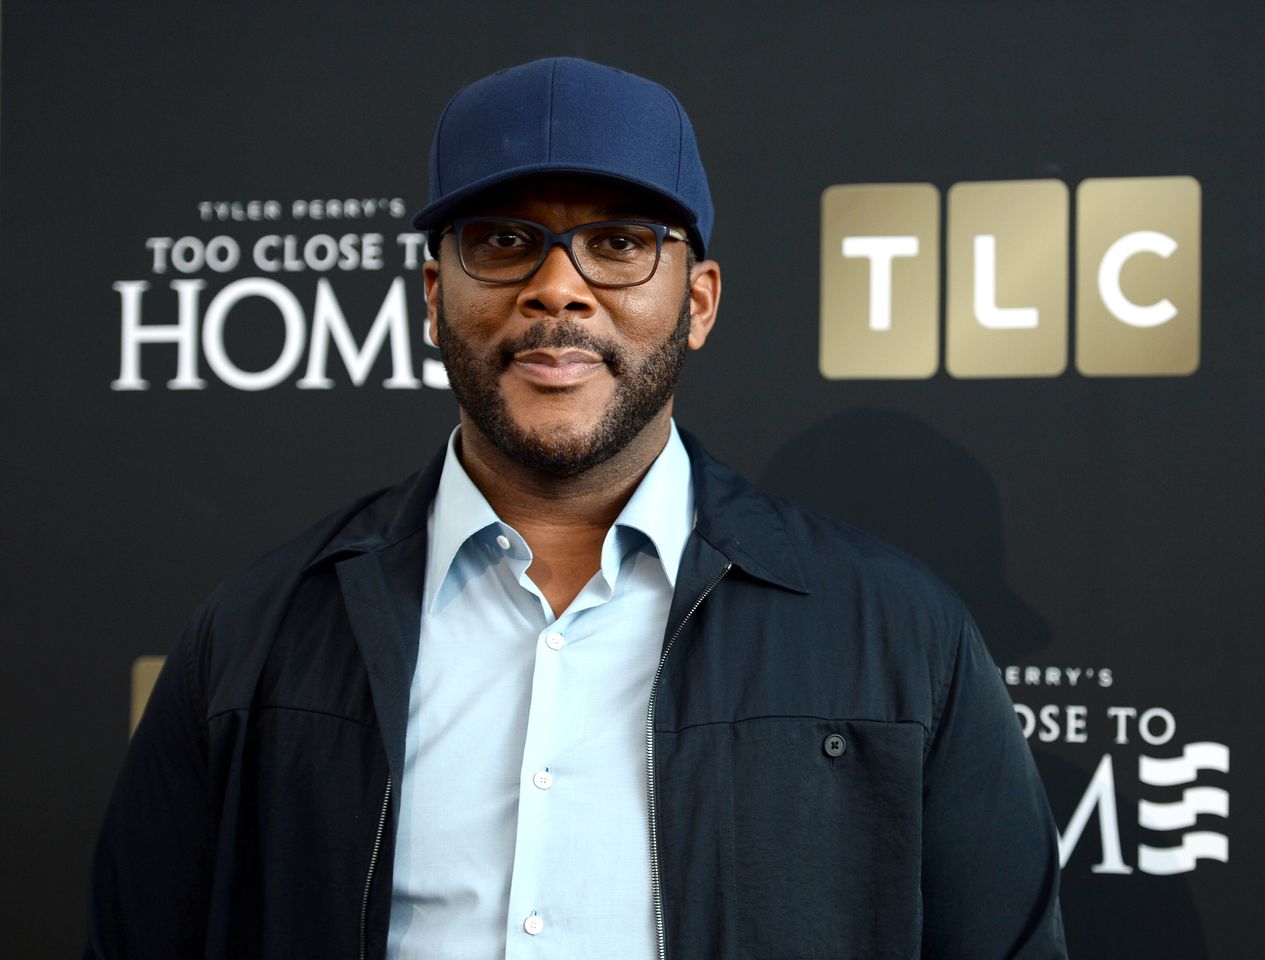 Tyler Perry at TLC's "Too Close To Home" screening in Beverly Hills on August 16, 2016 | Photo: Getty Images